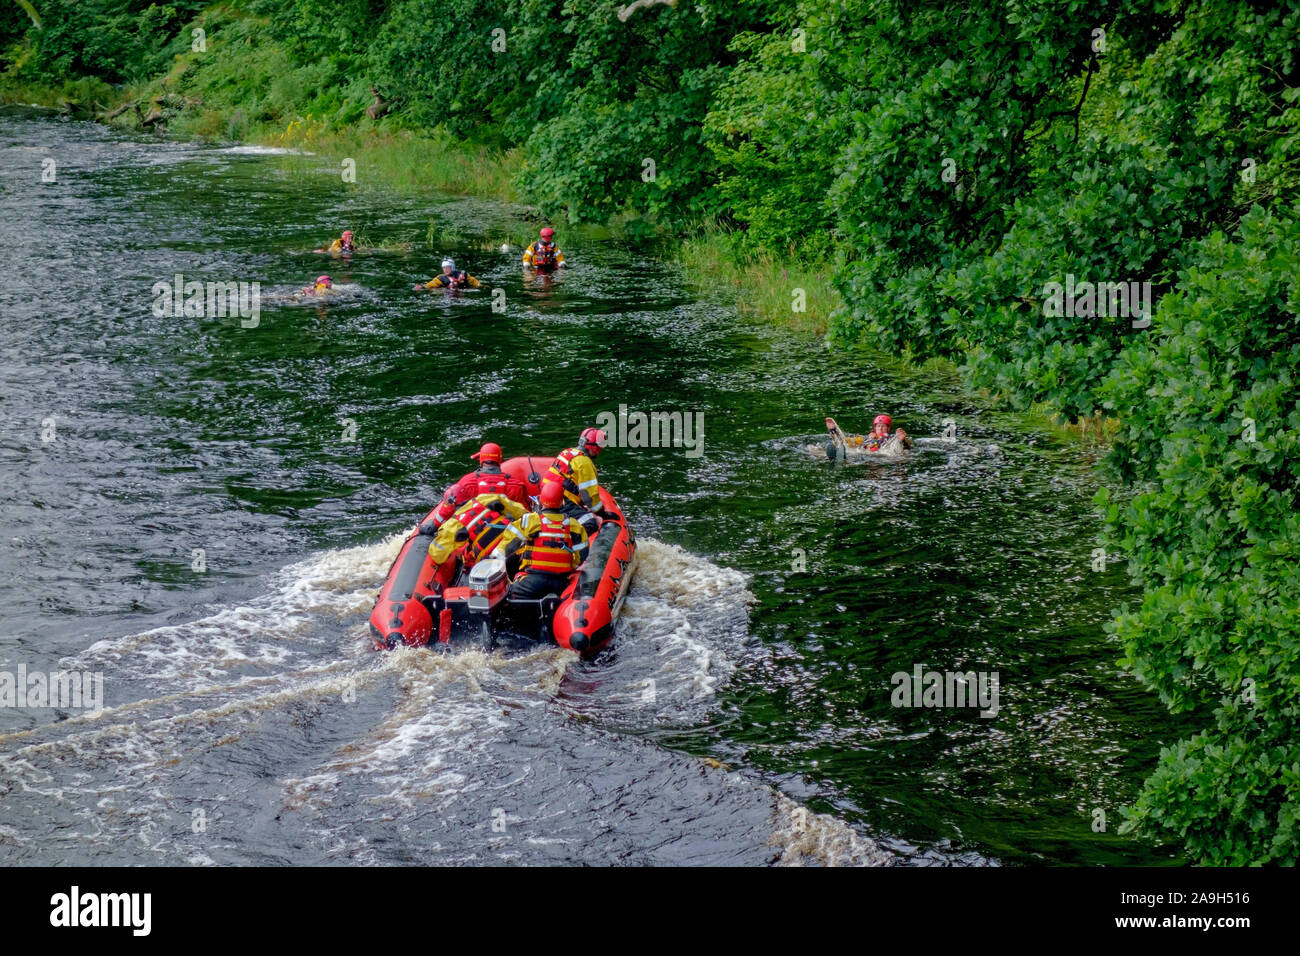 Scottish Fire and Rescue personnel on a water rescue training exercise in the River Cree at Newton Stewart, Dumfries and Galloway, Scotland. Stock Photo